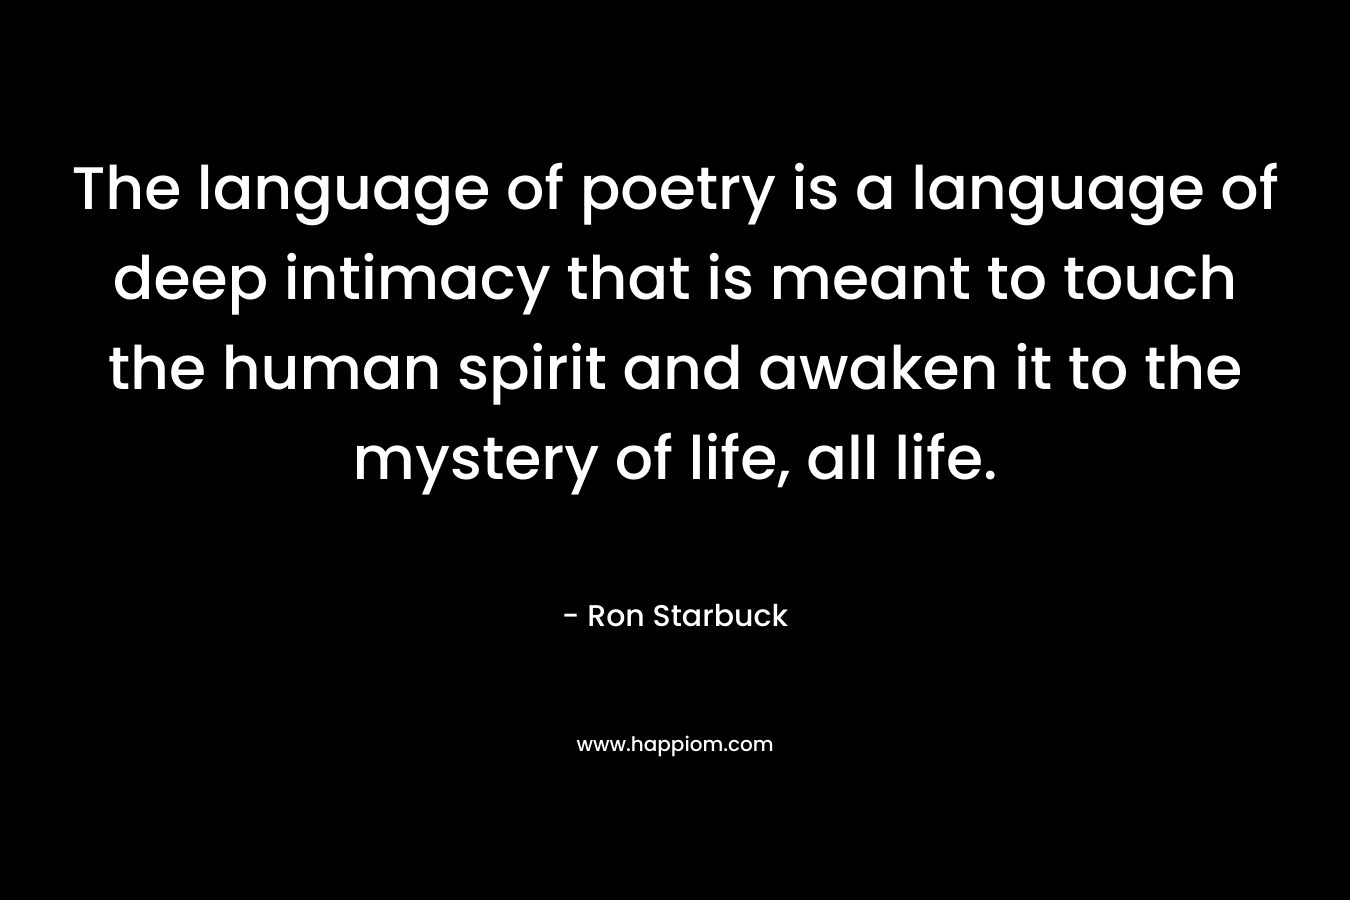 The language of poetry is a language of deep intimacy that is meant to touch the human spirit and awaken it to the mystery of life, all life. – Ron Starbuck